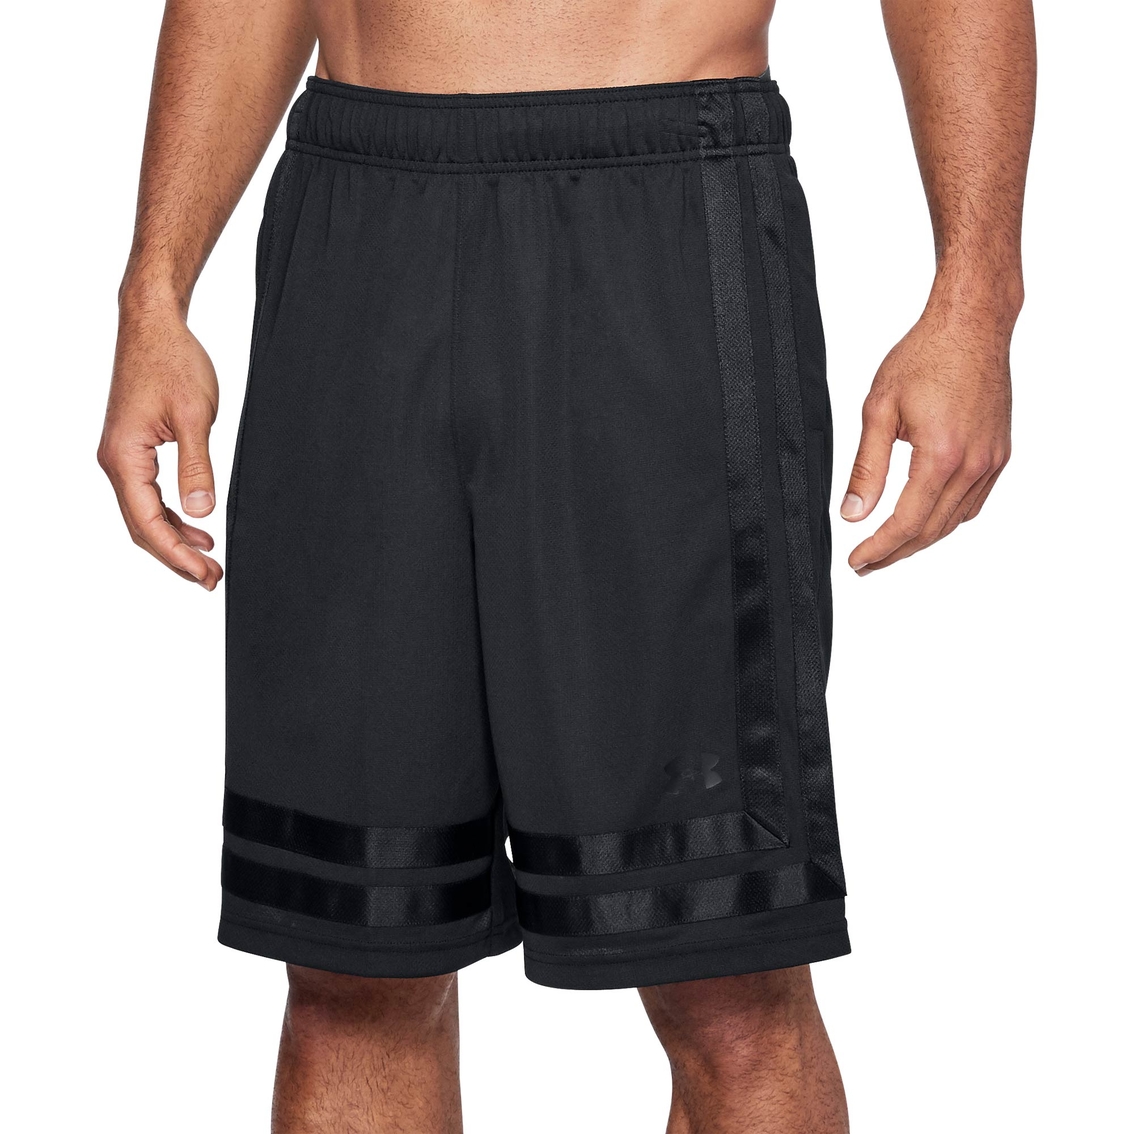 Under Armour Men's Baseline 10 In. Shorts 18, Shorts